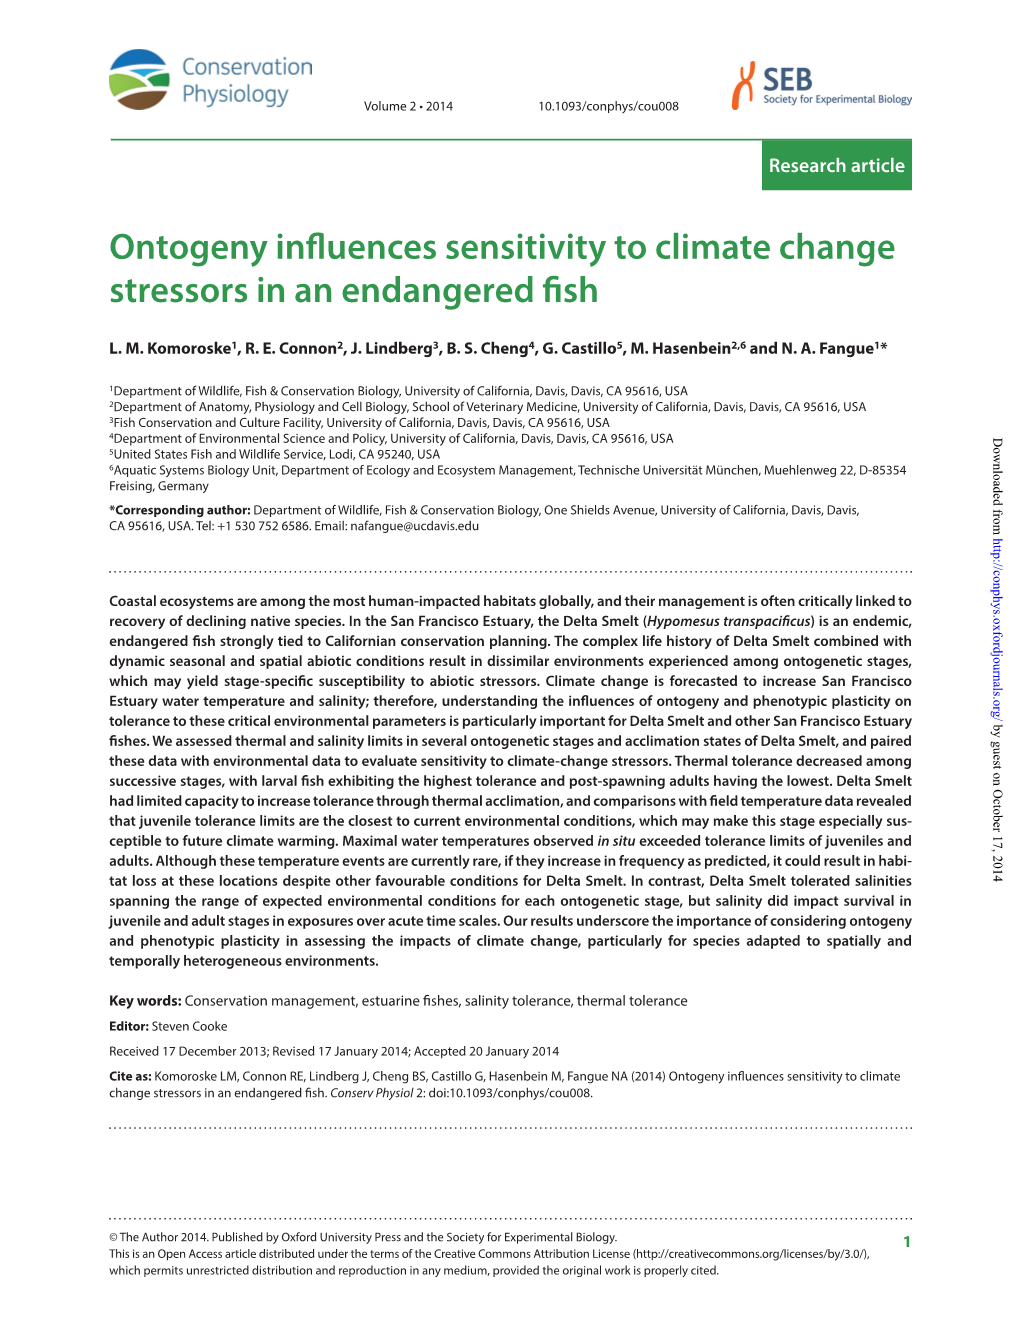 Ontogeny Influences Sensitivity to Climate Change Stressors in an Endangered Fish